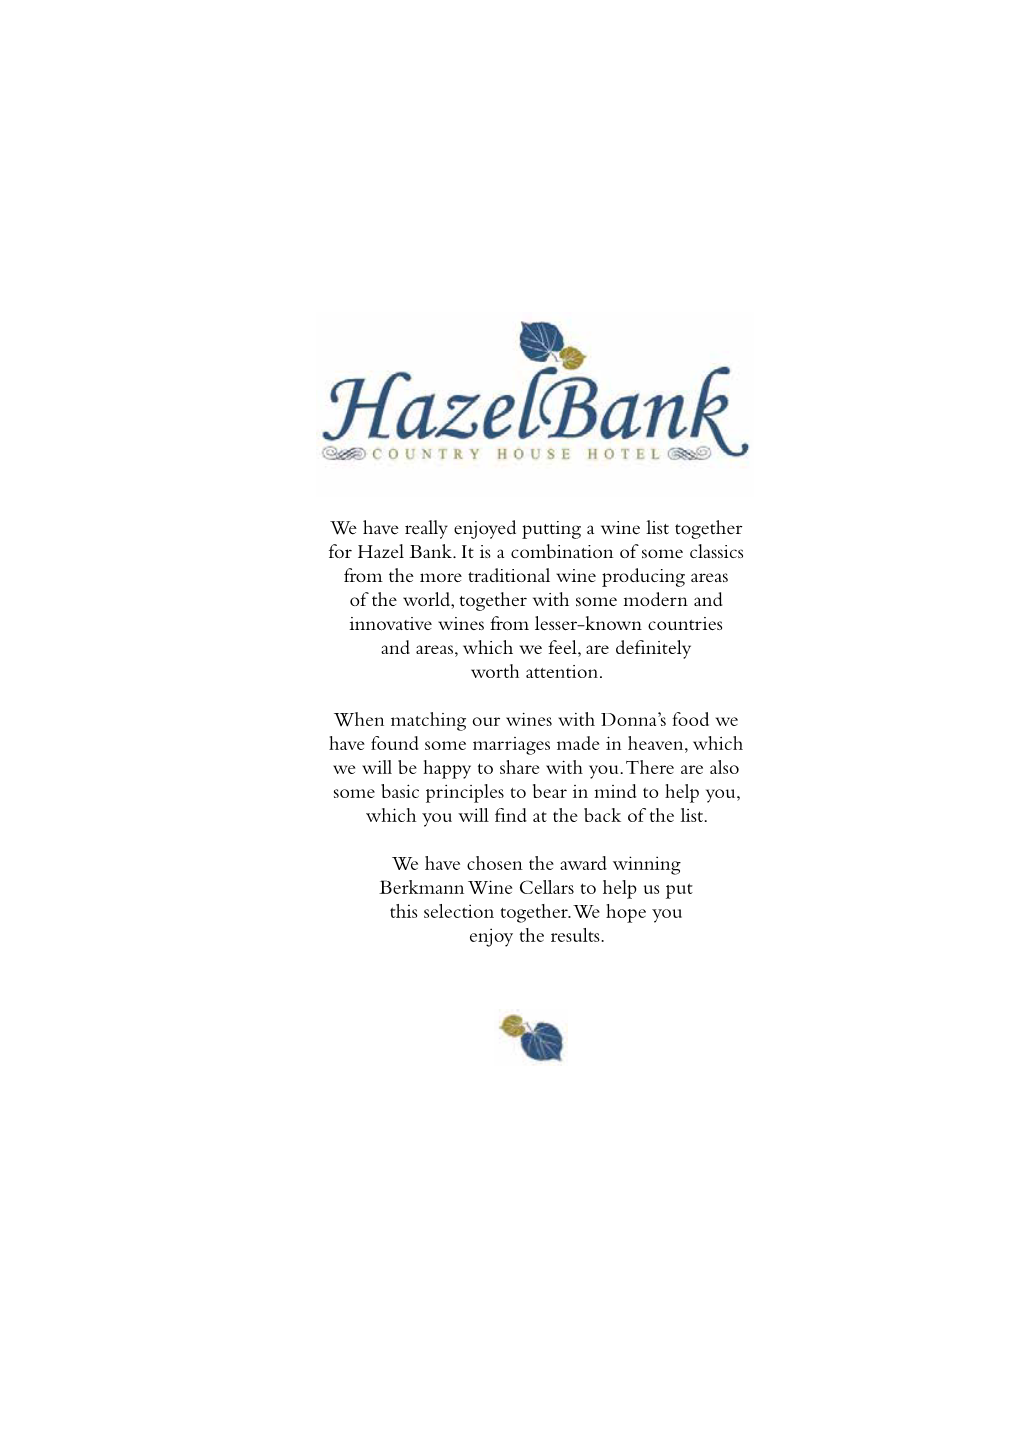 We Have Really Enjoyed Putting a Wine List Together for Hazel Bank. It Is A